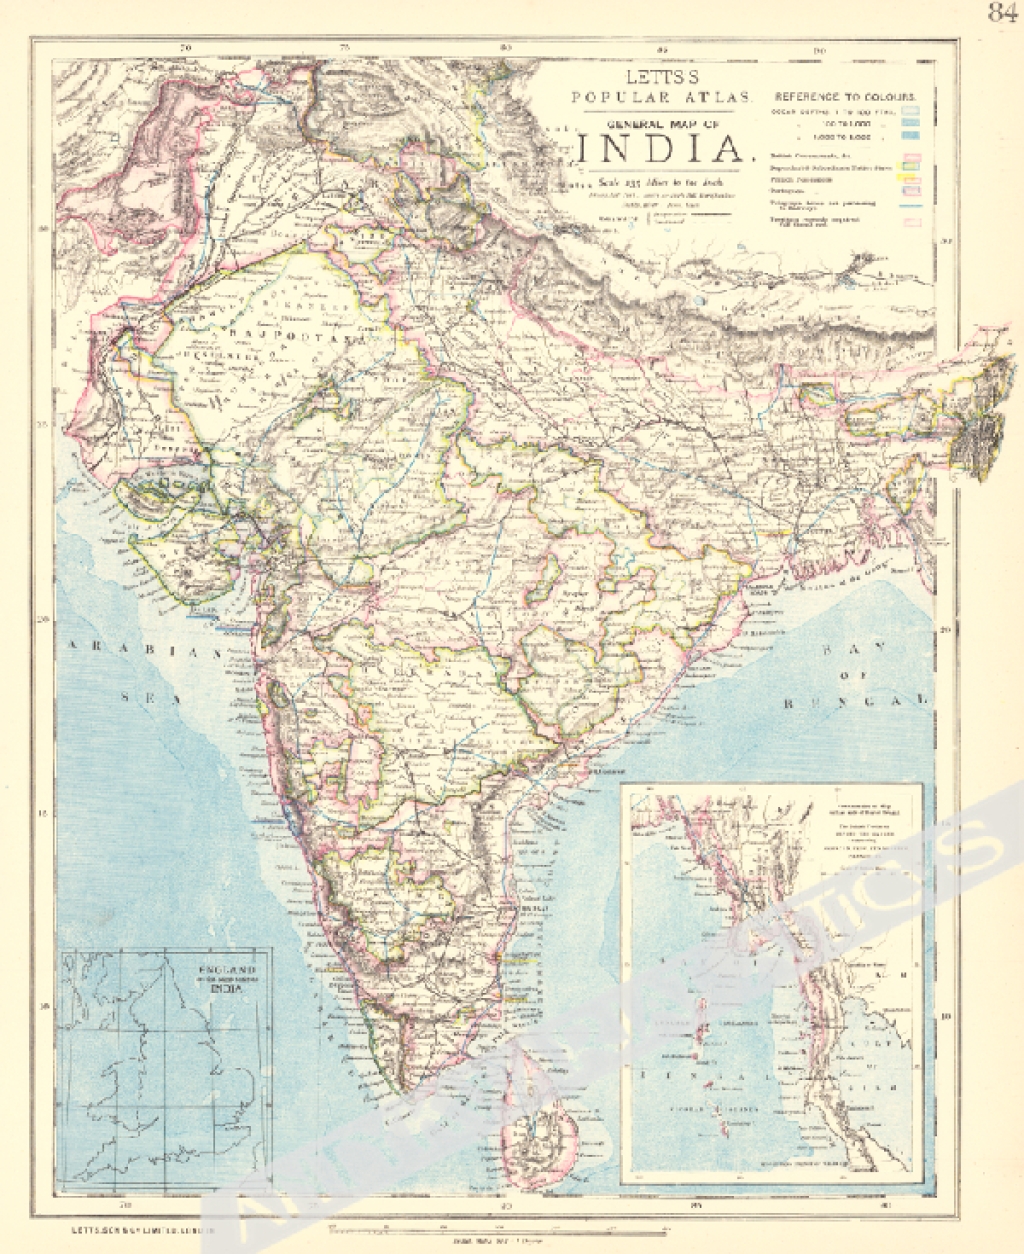 [mapa, Indie,1883] General map of India